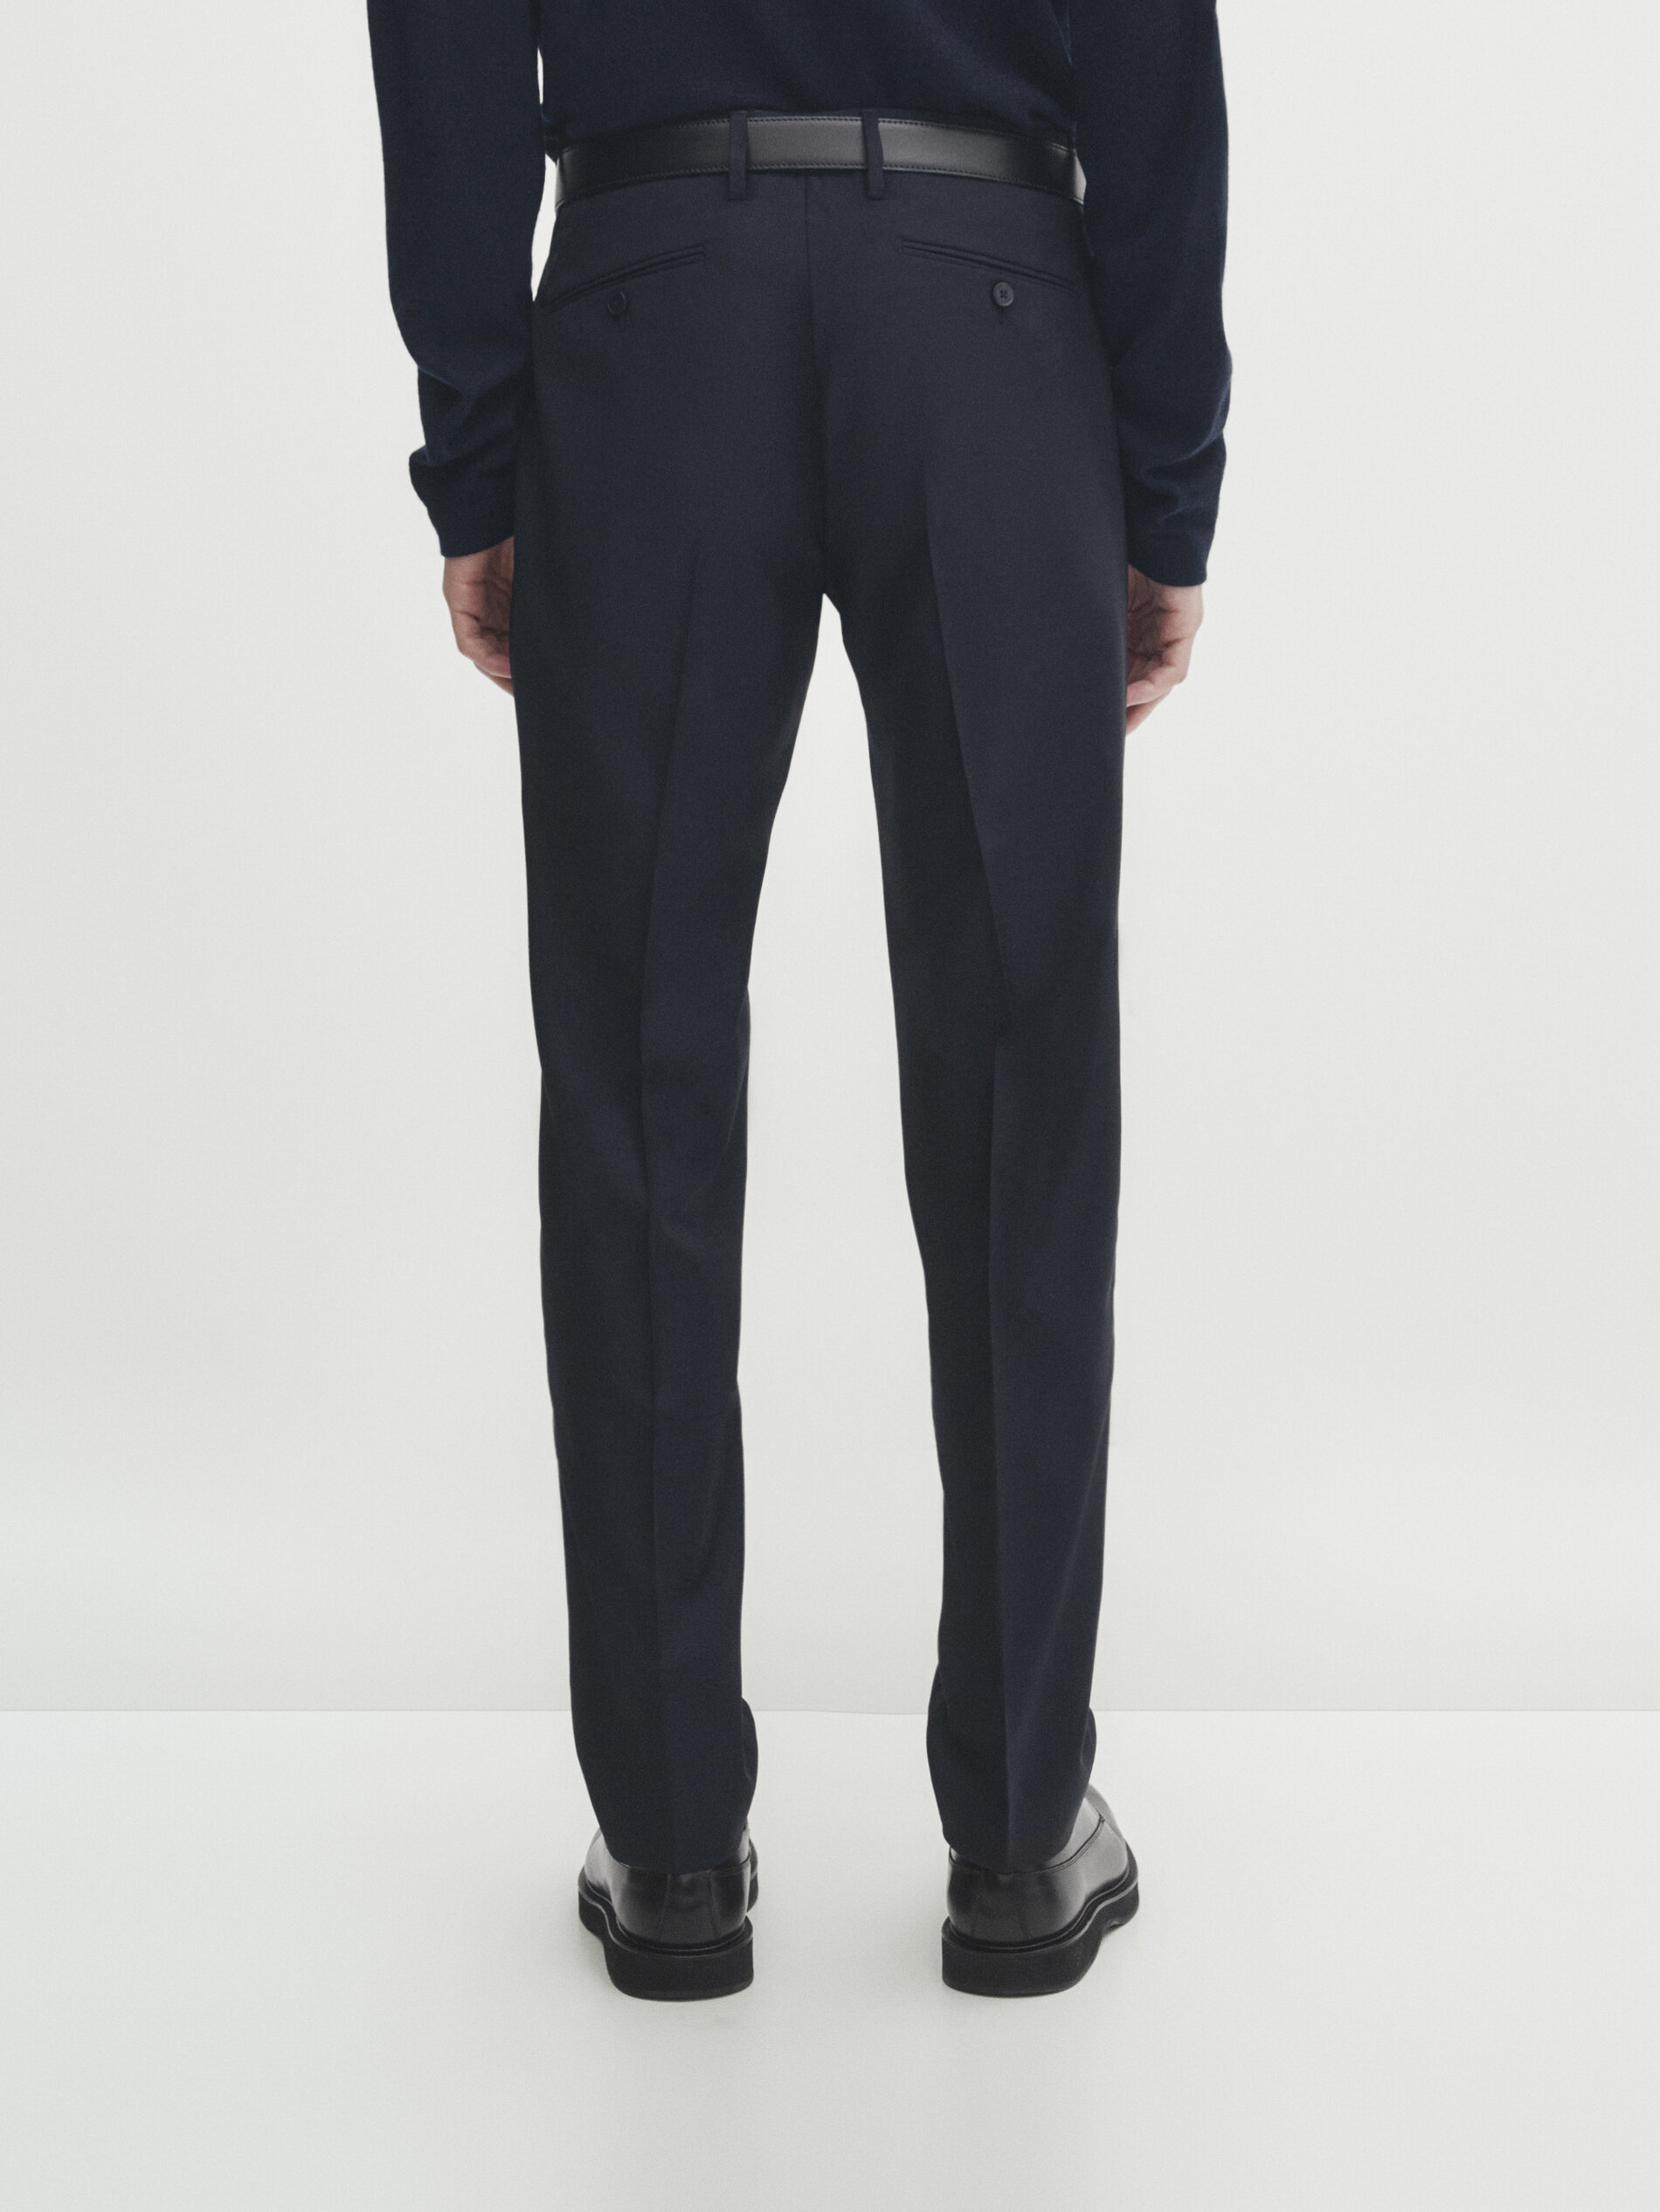 Taylor & Wright Panama Navy Slim Fit Suit Trousers - Matalan